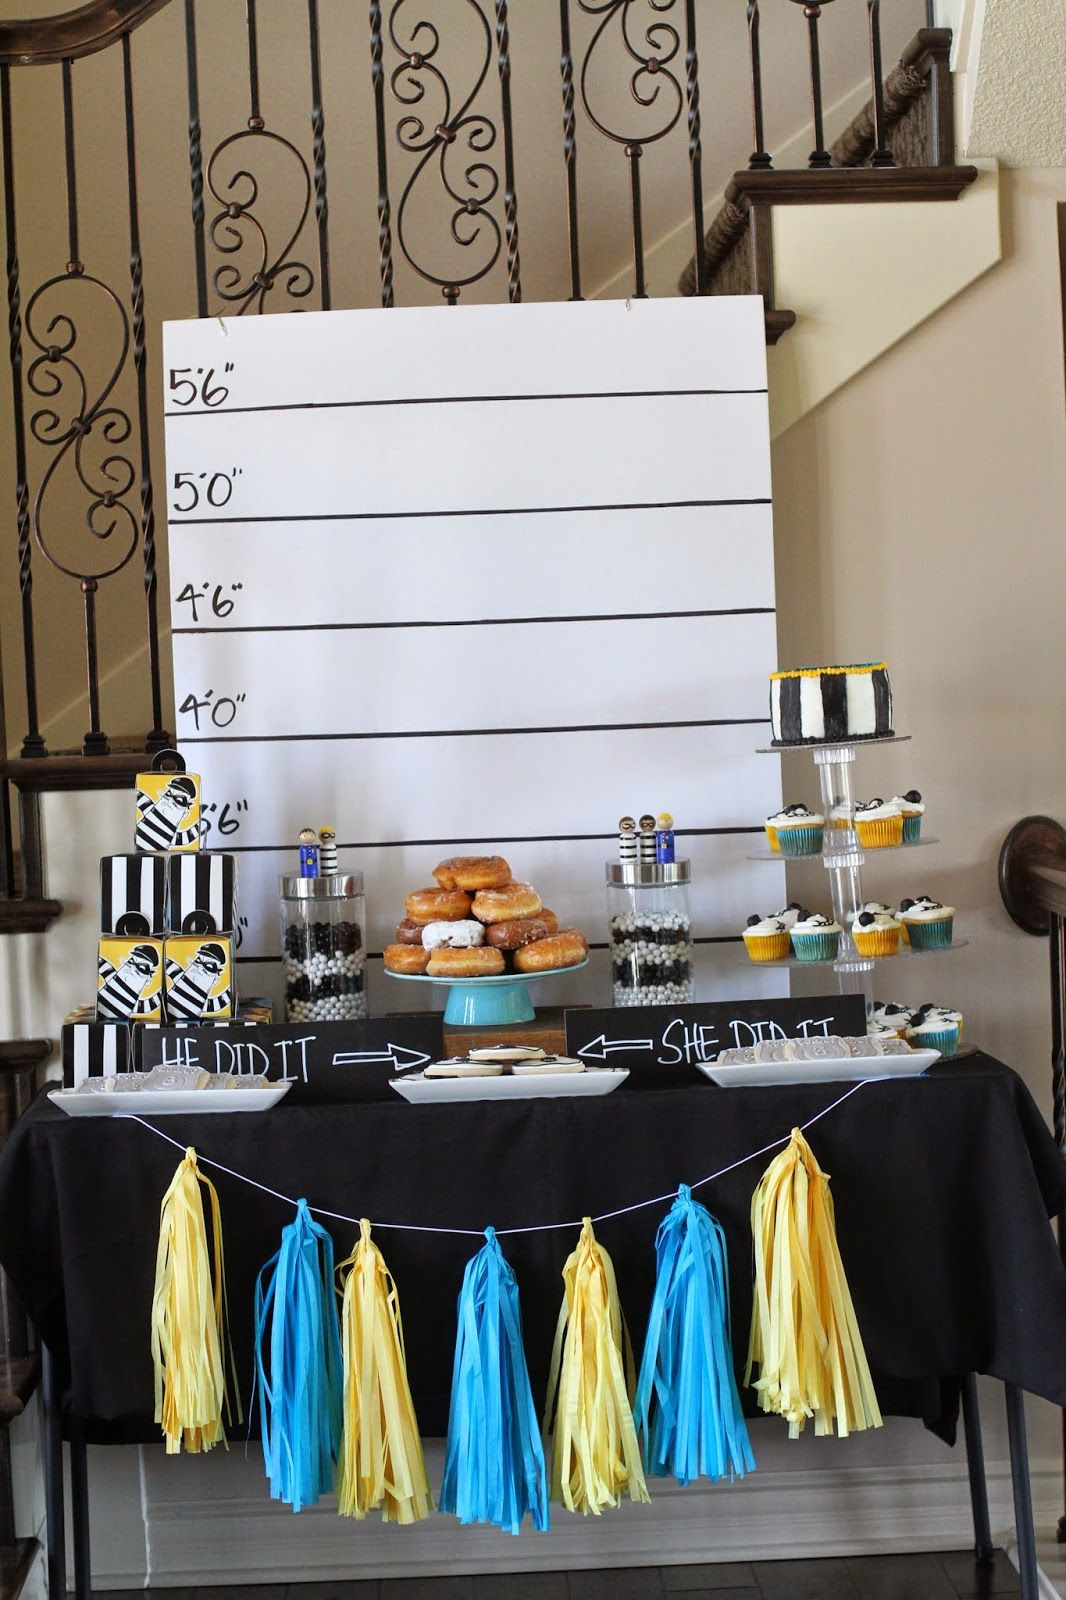 Police Graduation Party Ideas
 35 Best Police Academy Graduation Party Ideas Best Party